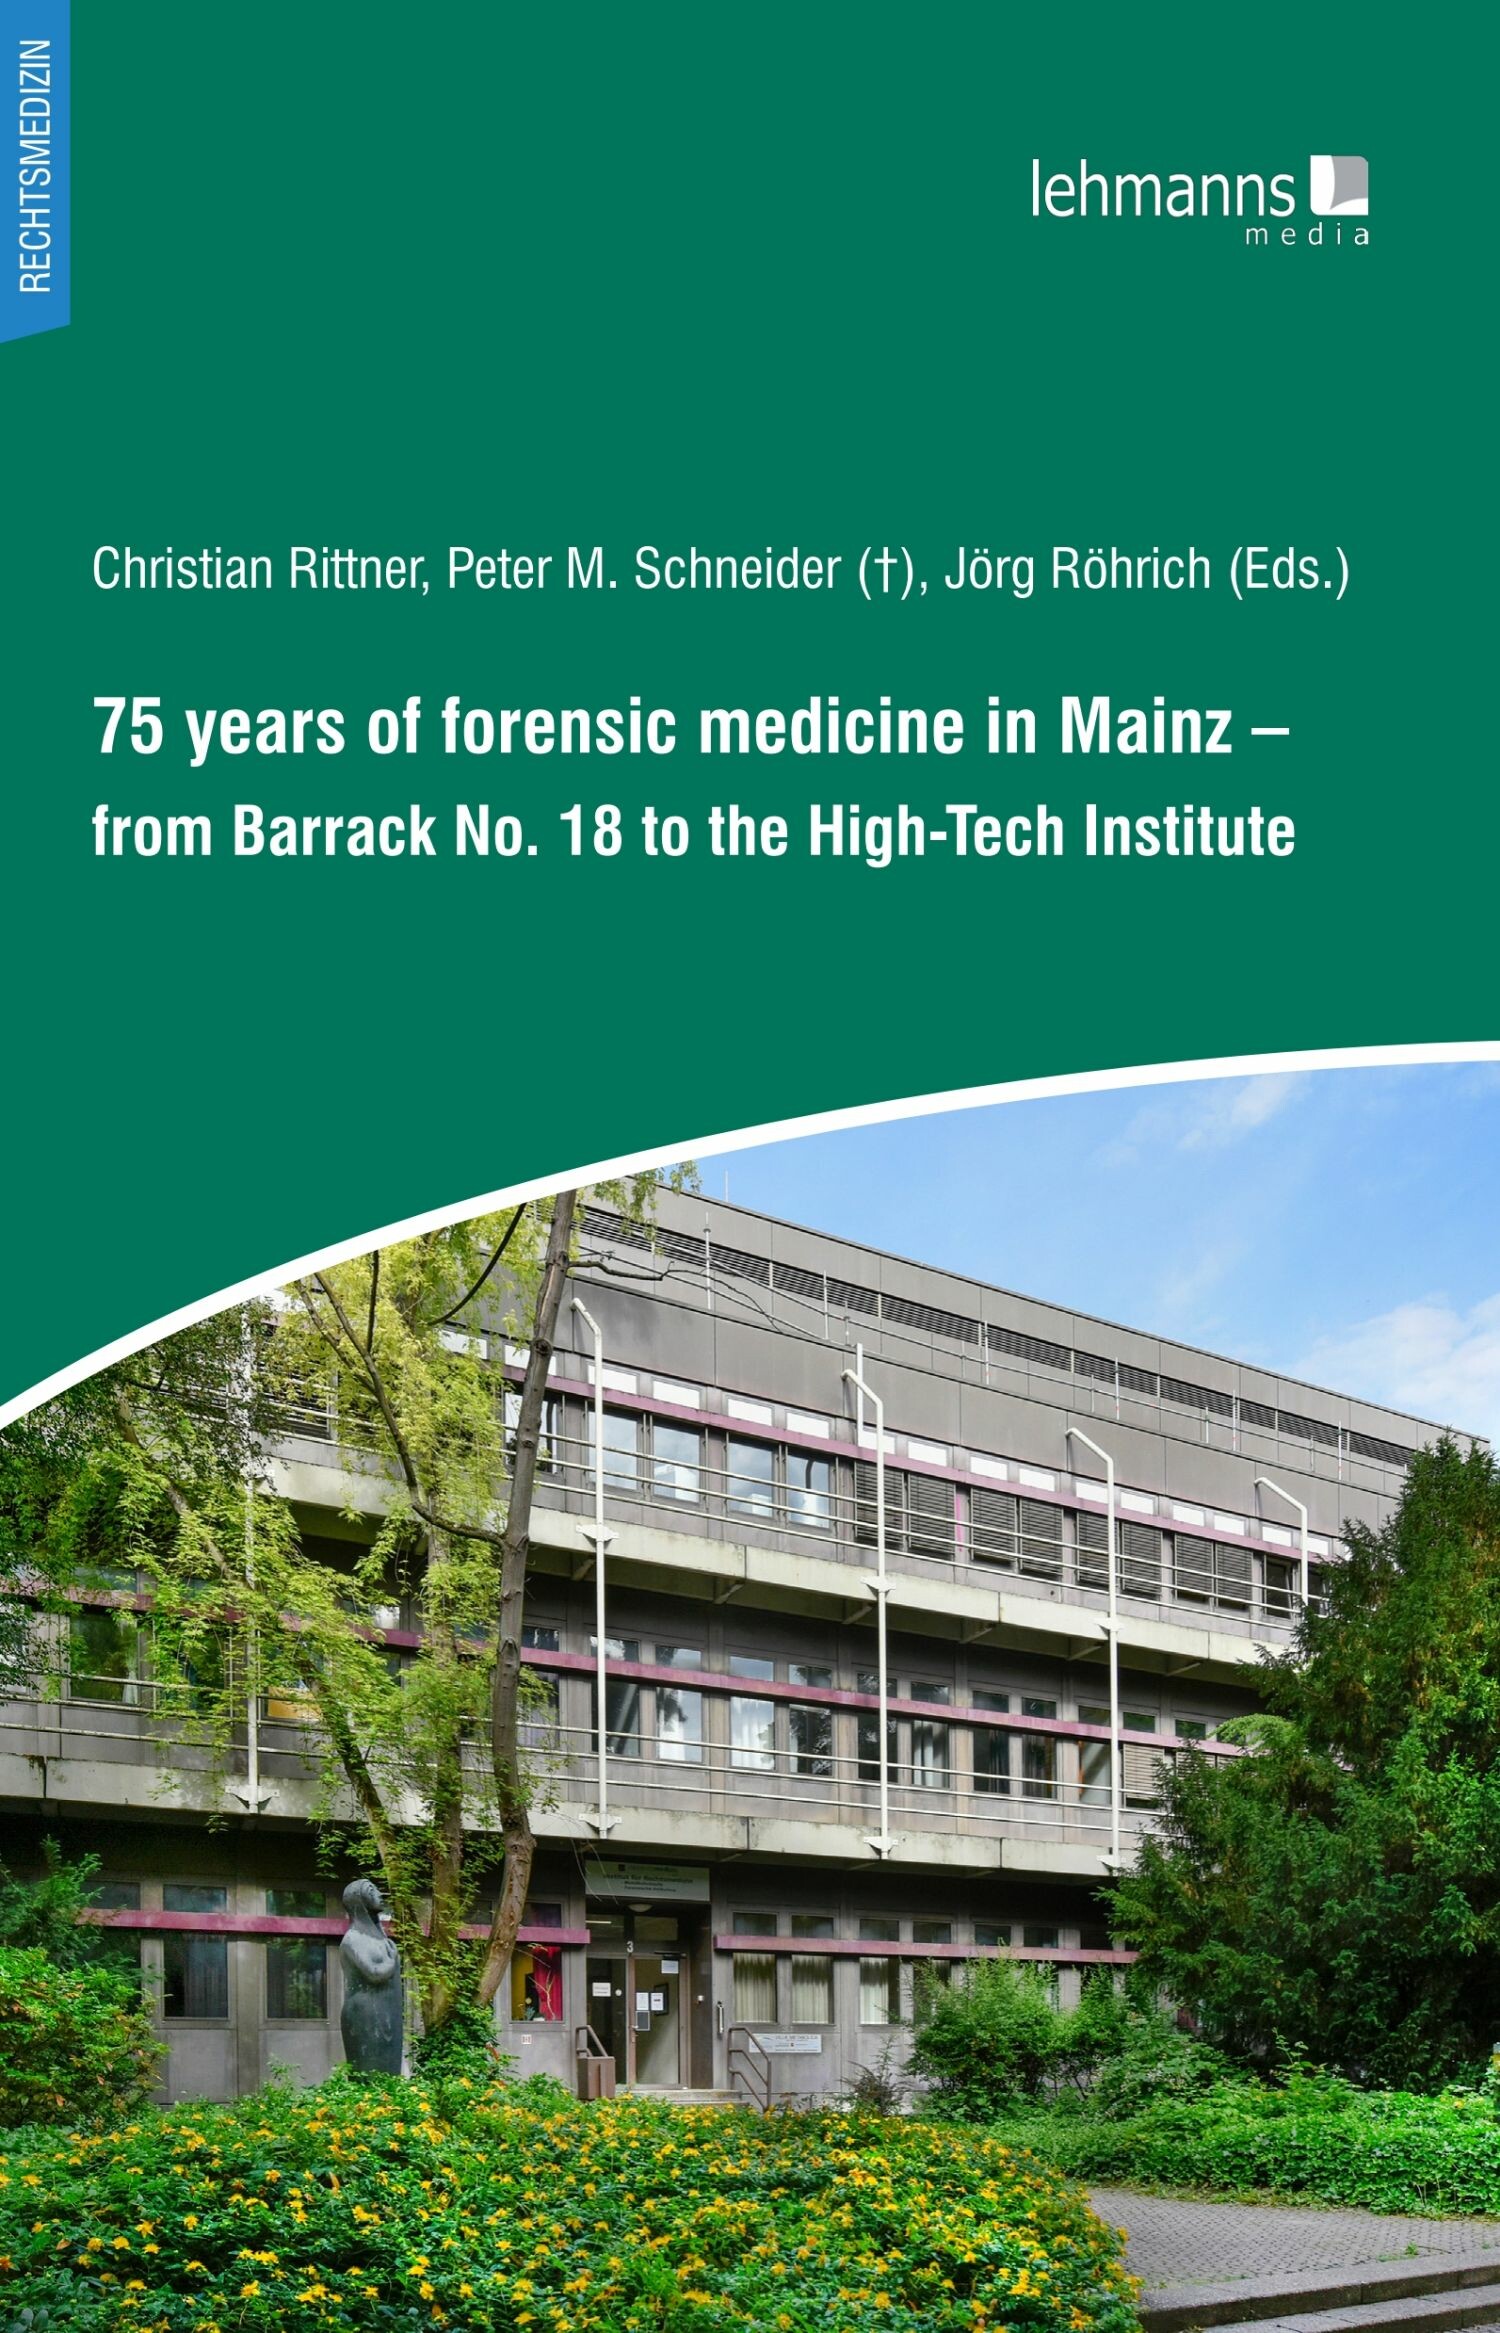 75 years of forensic medicine in Mainz